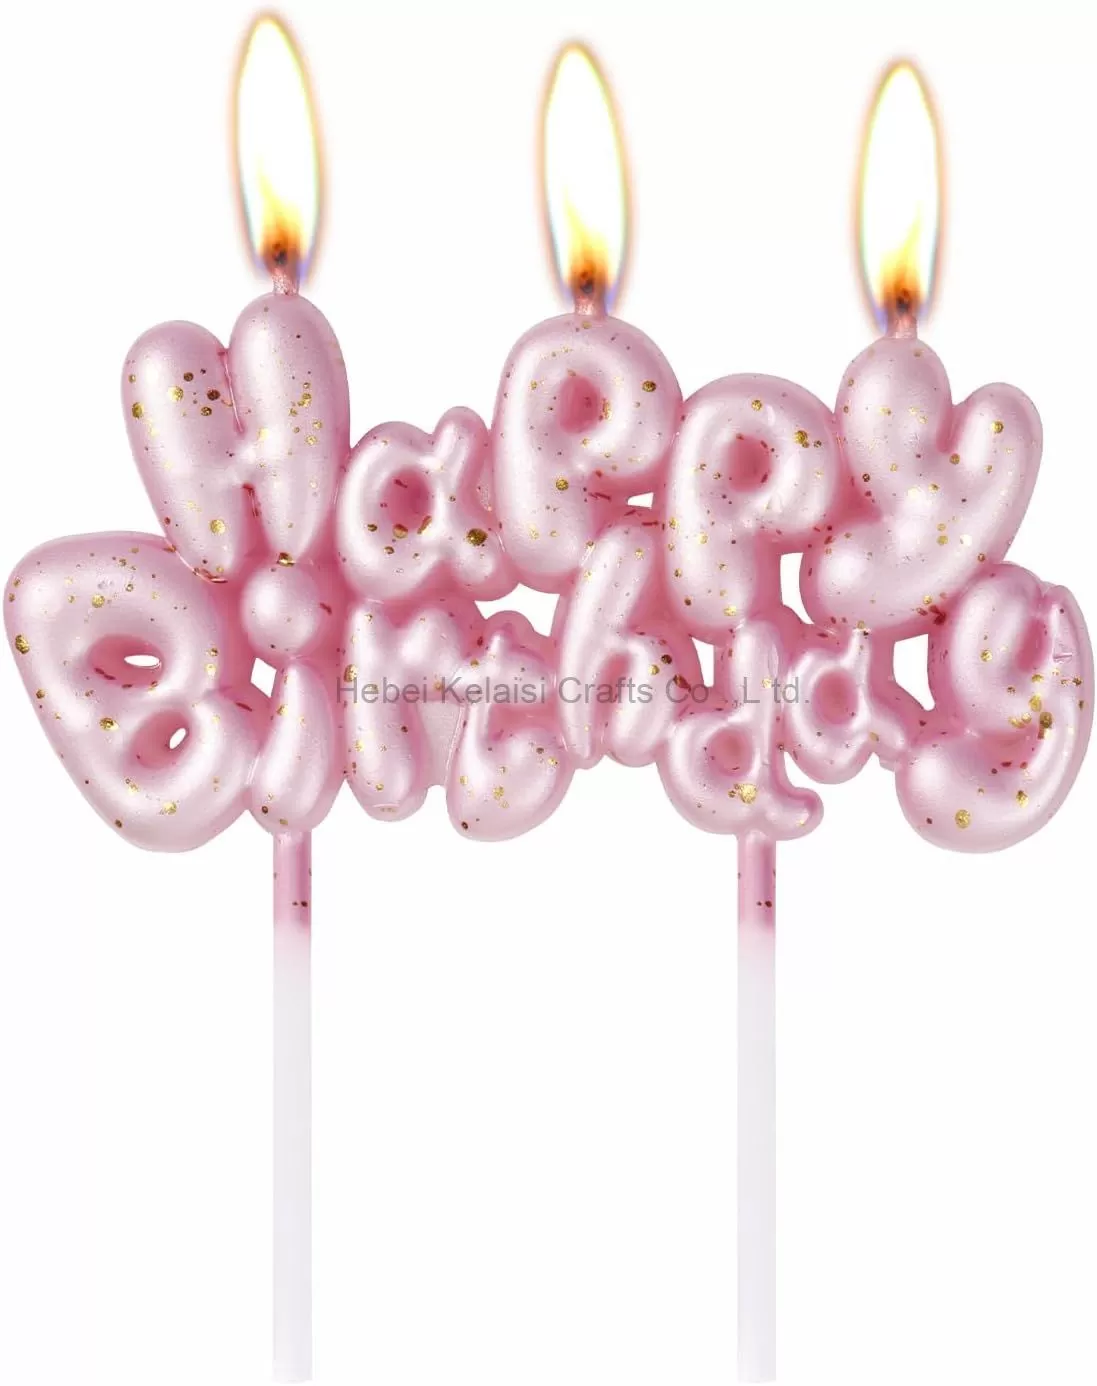 Parties Decoration Supplies Happy Birthday Candles Letter Candles with Gold Foil